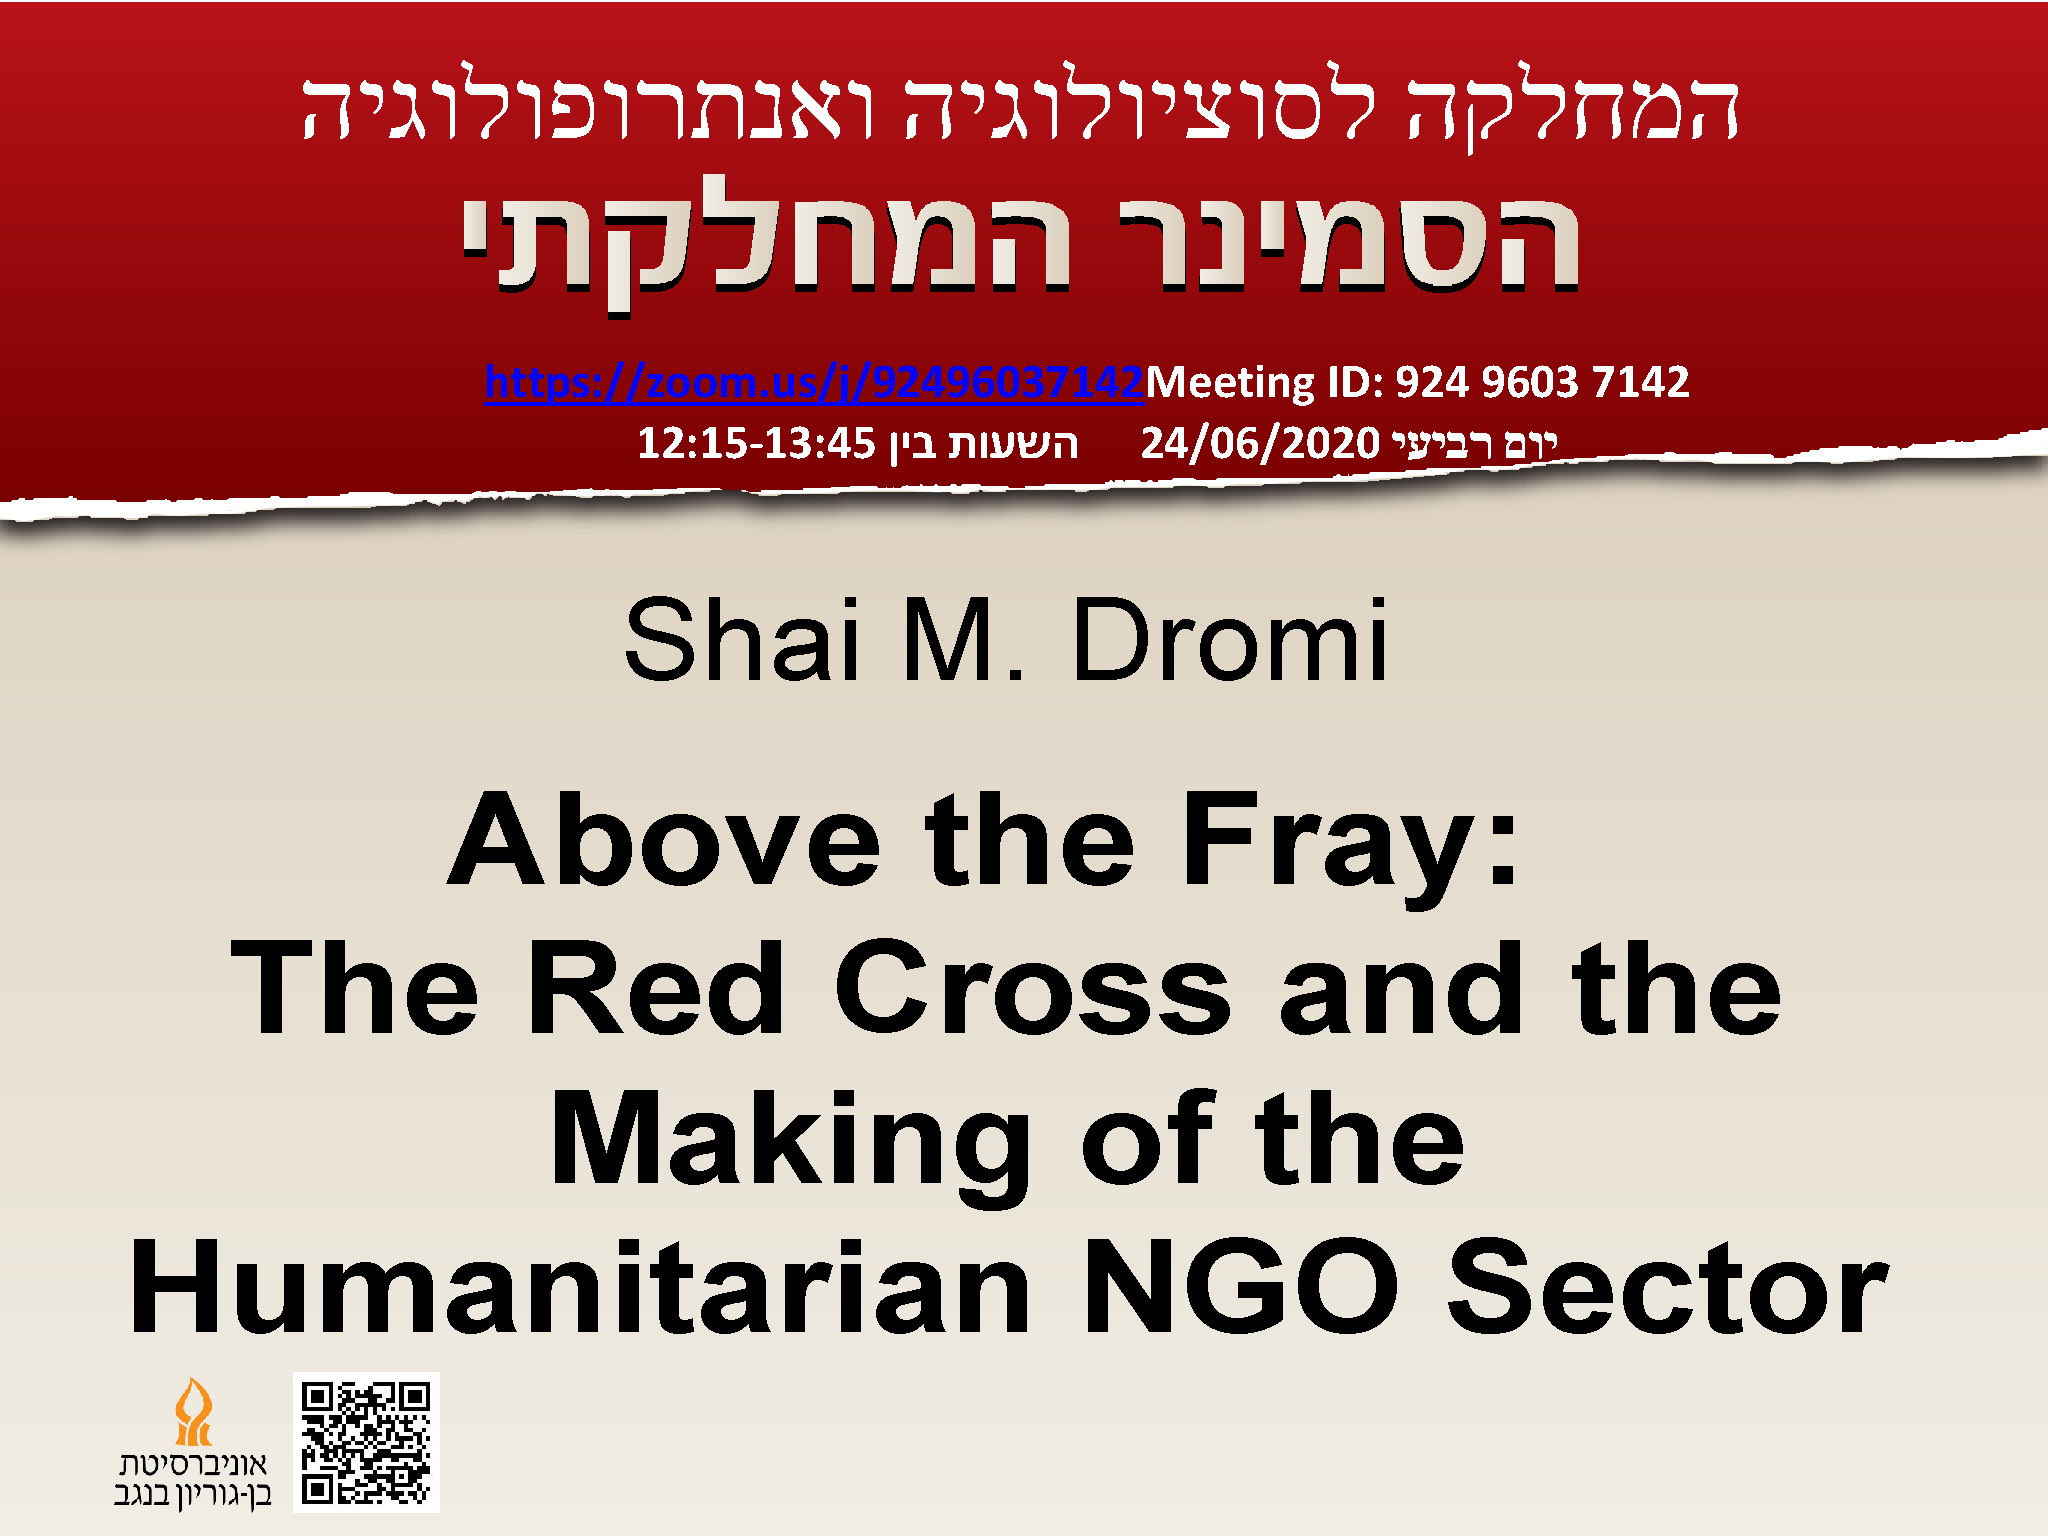 Shai M. Dromi - Above the Fray: The Red Cross and the Making of the Humanitarian NGO Sector